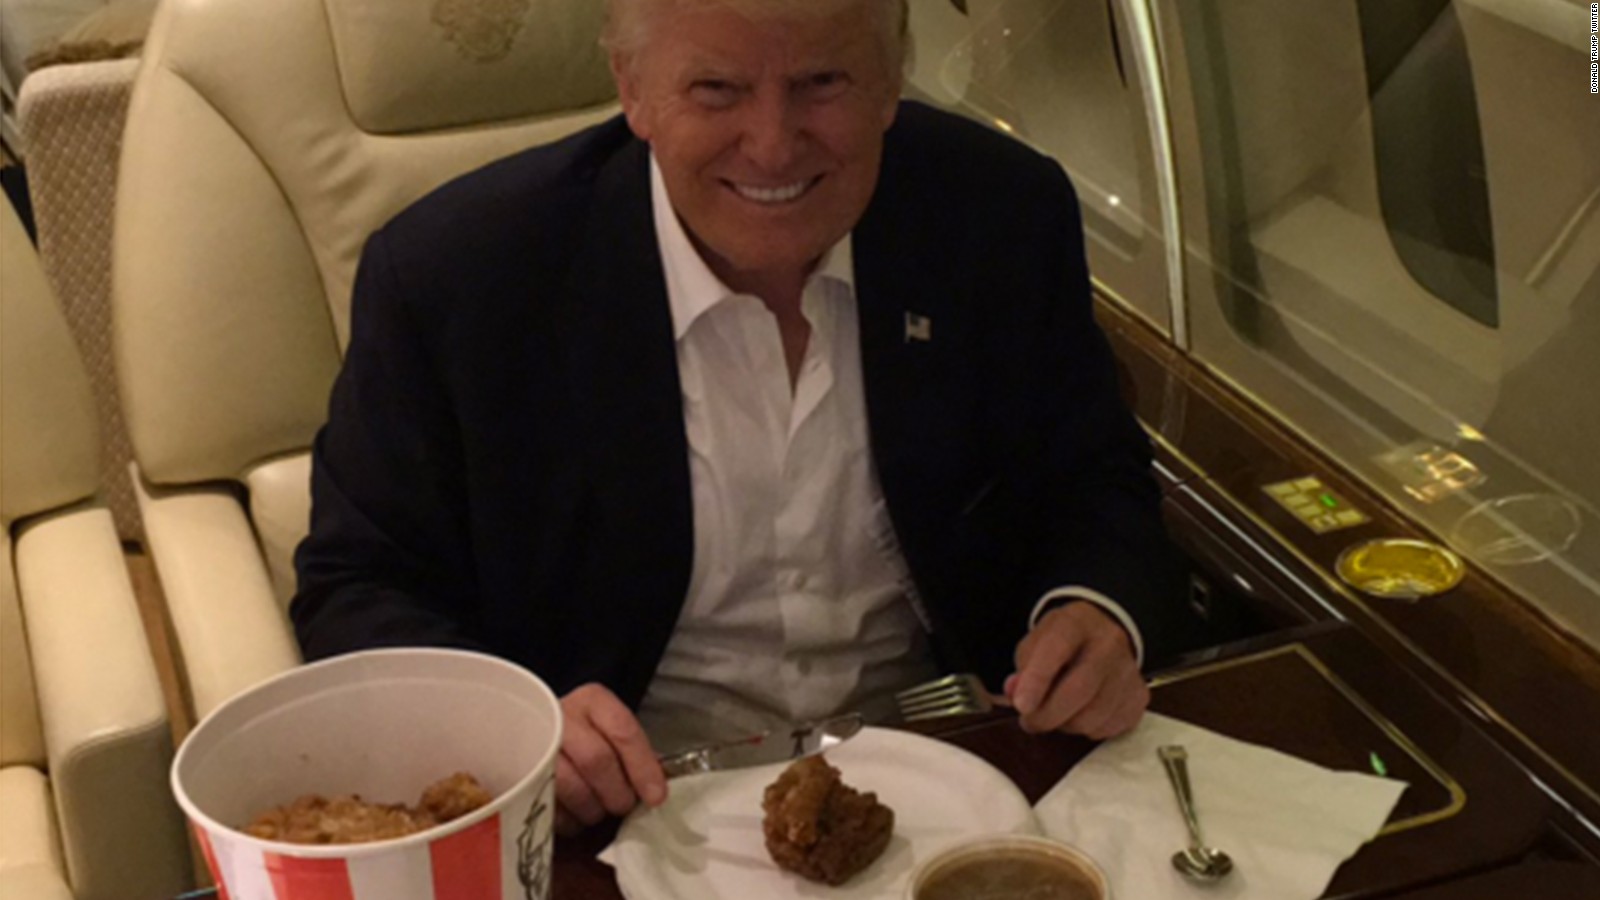 160802090304-donald-trump-eats-kfc-with-knife-and-fork-full-169.jpg